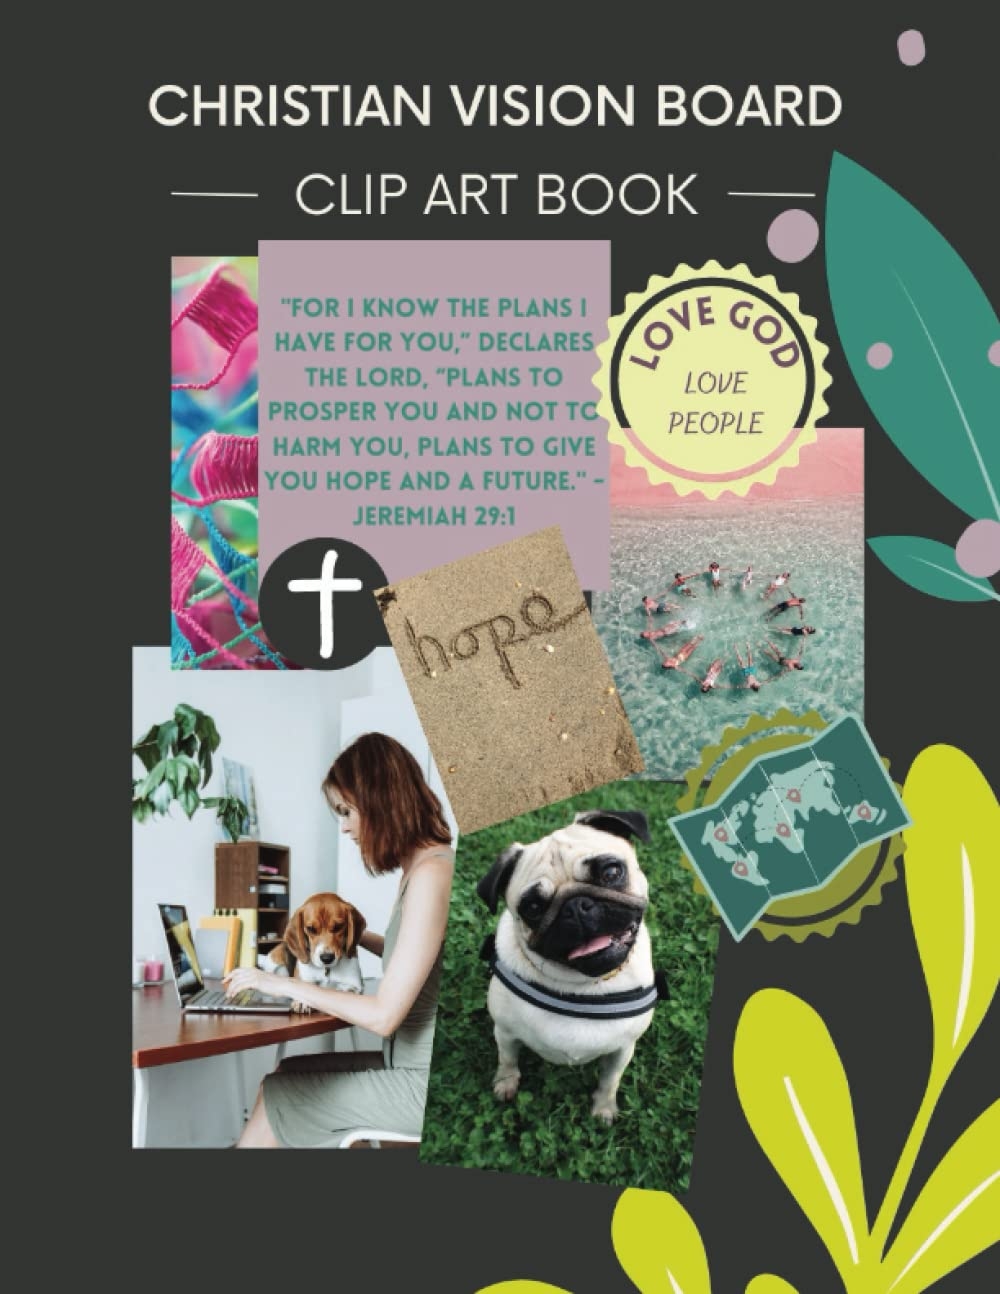 Christian Vision Board: Clip Art Book  Create a Powerful Future life goals  - Journey Together Publishing